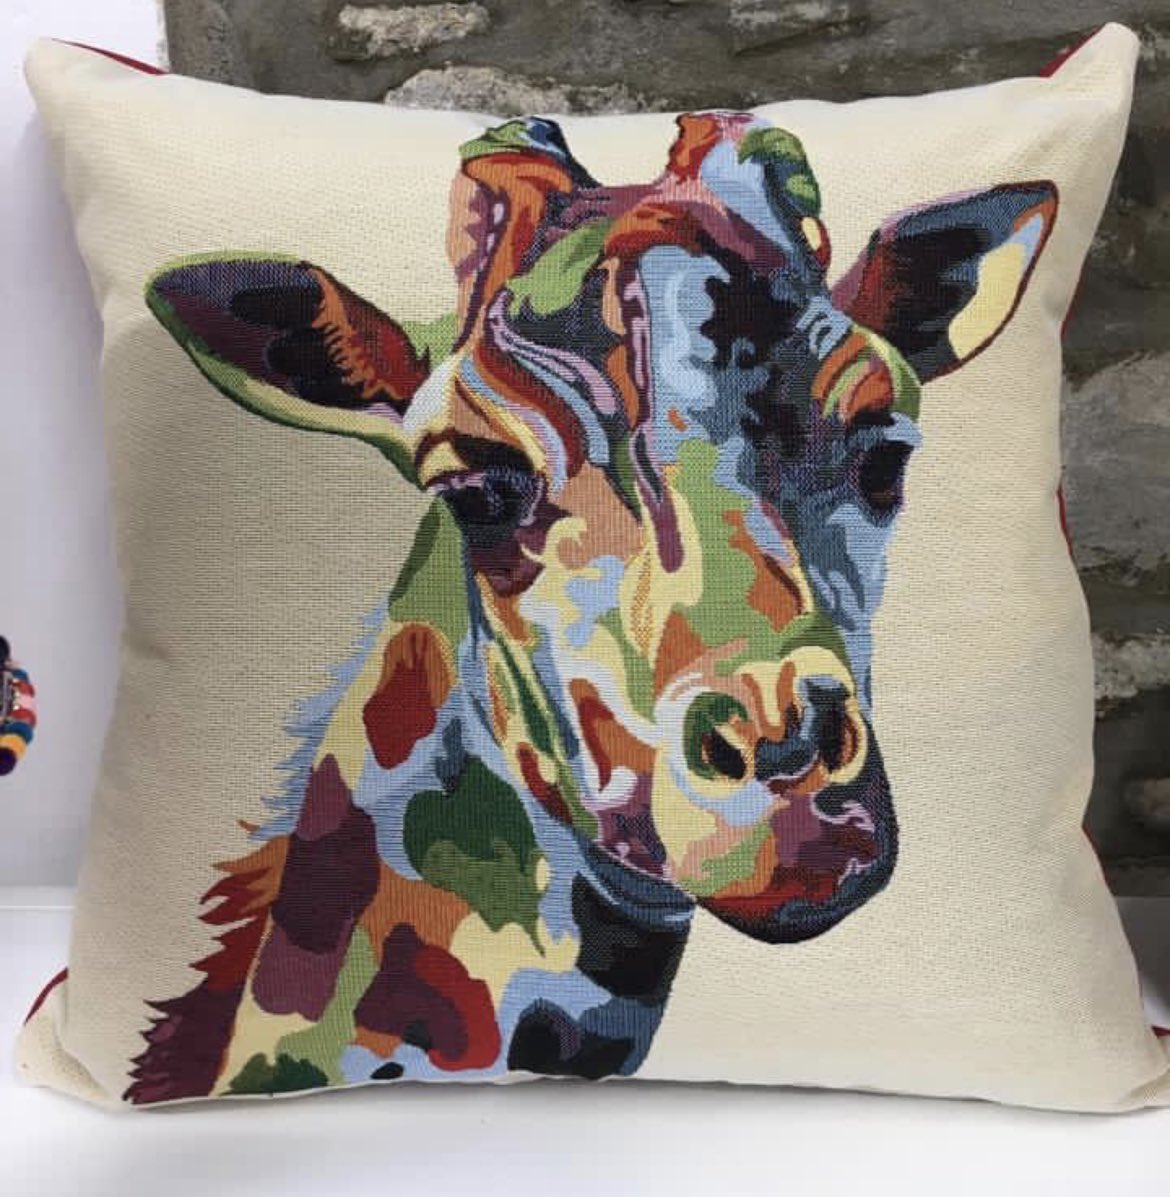 New cushion design available. I’ll have some ready this week for anyone interested. 

#colour #cushion #giraffe #madelical #madebyme #MadeInCavan #HandmadeTakesTime